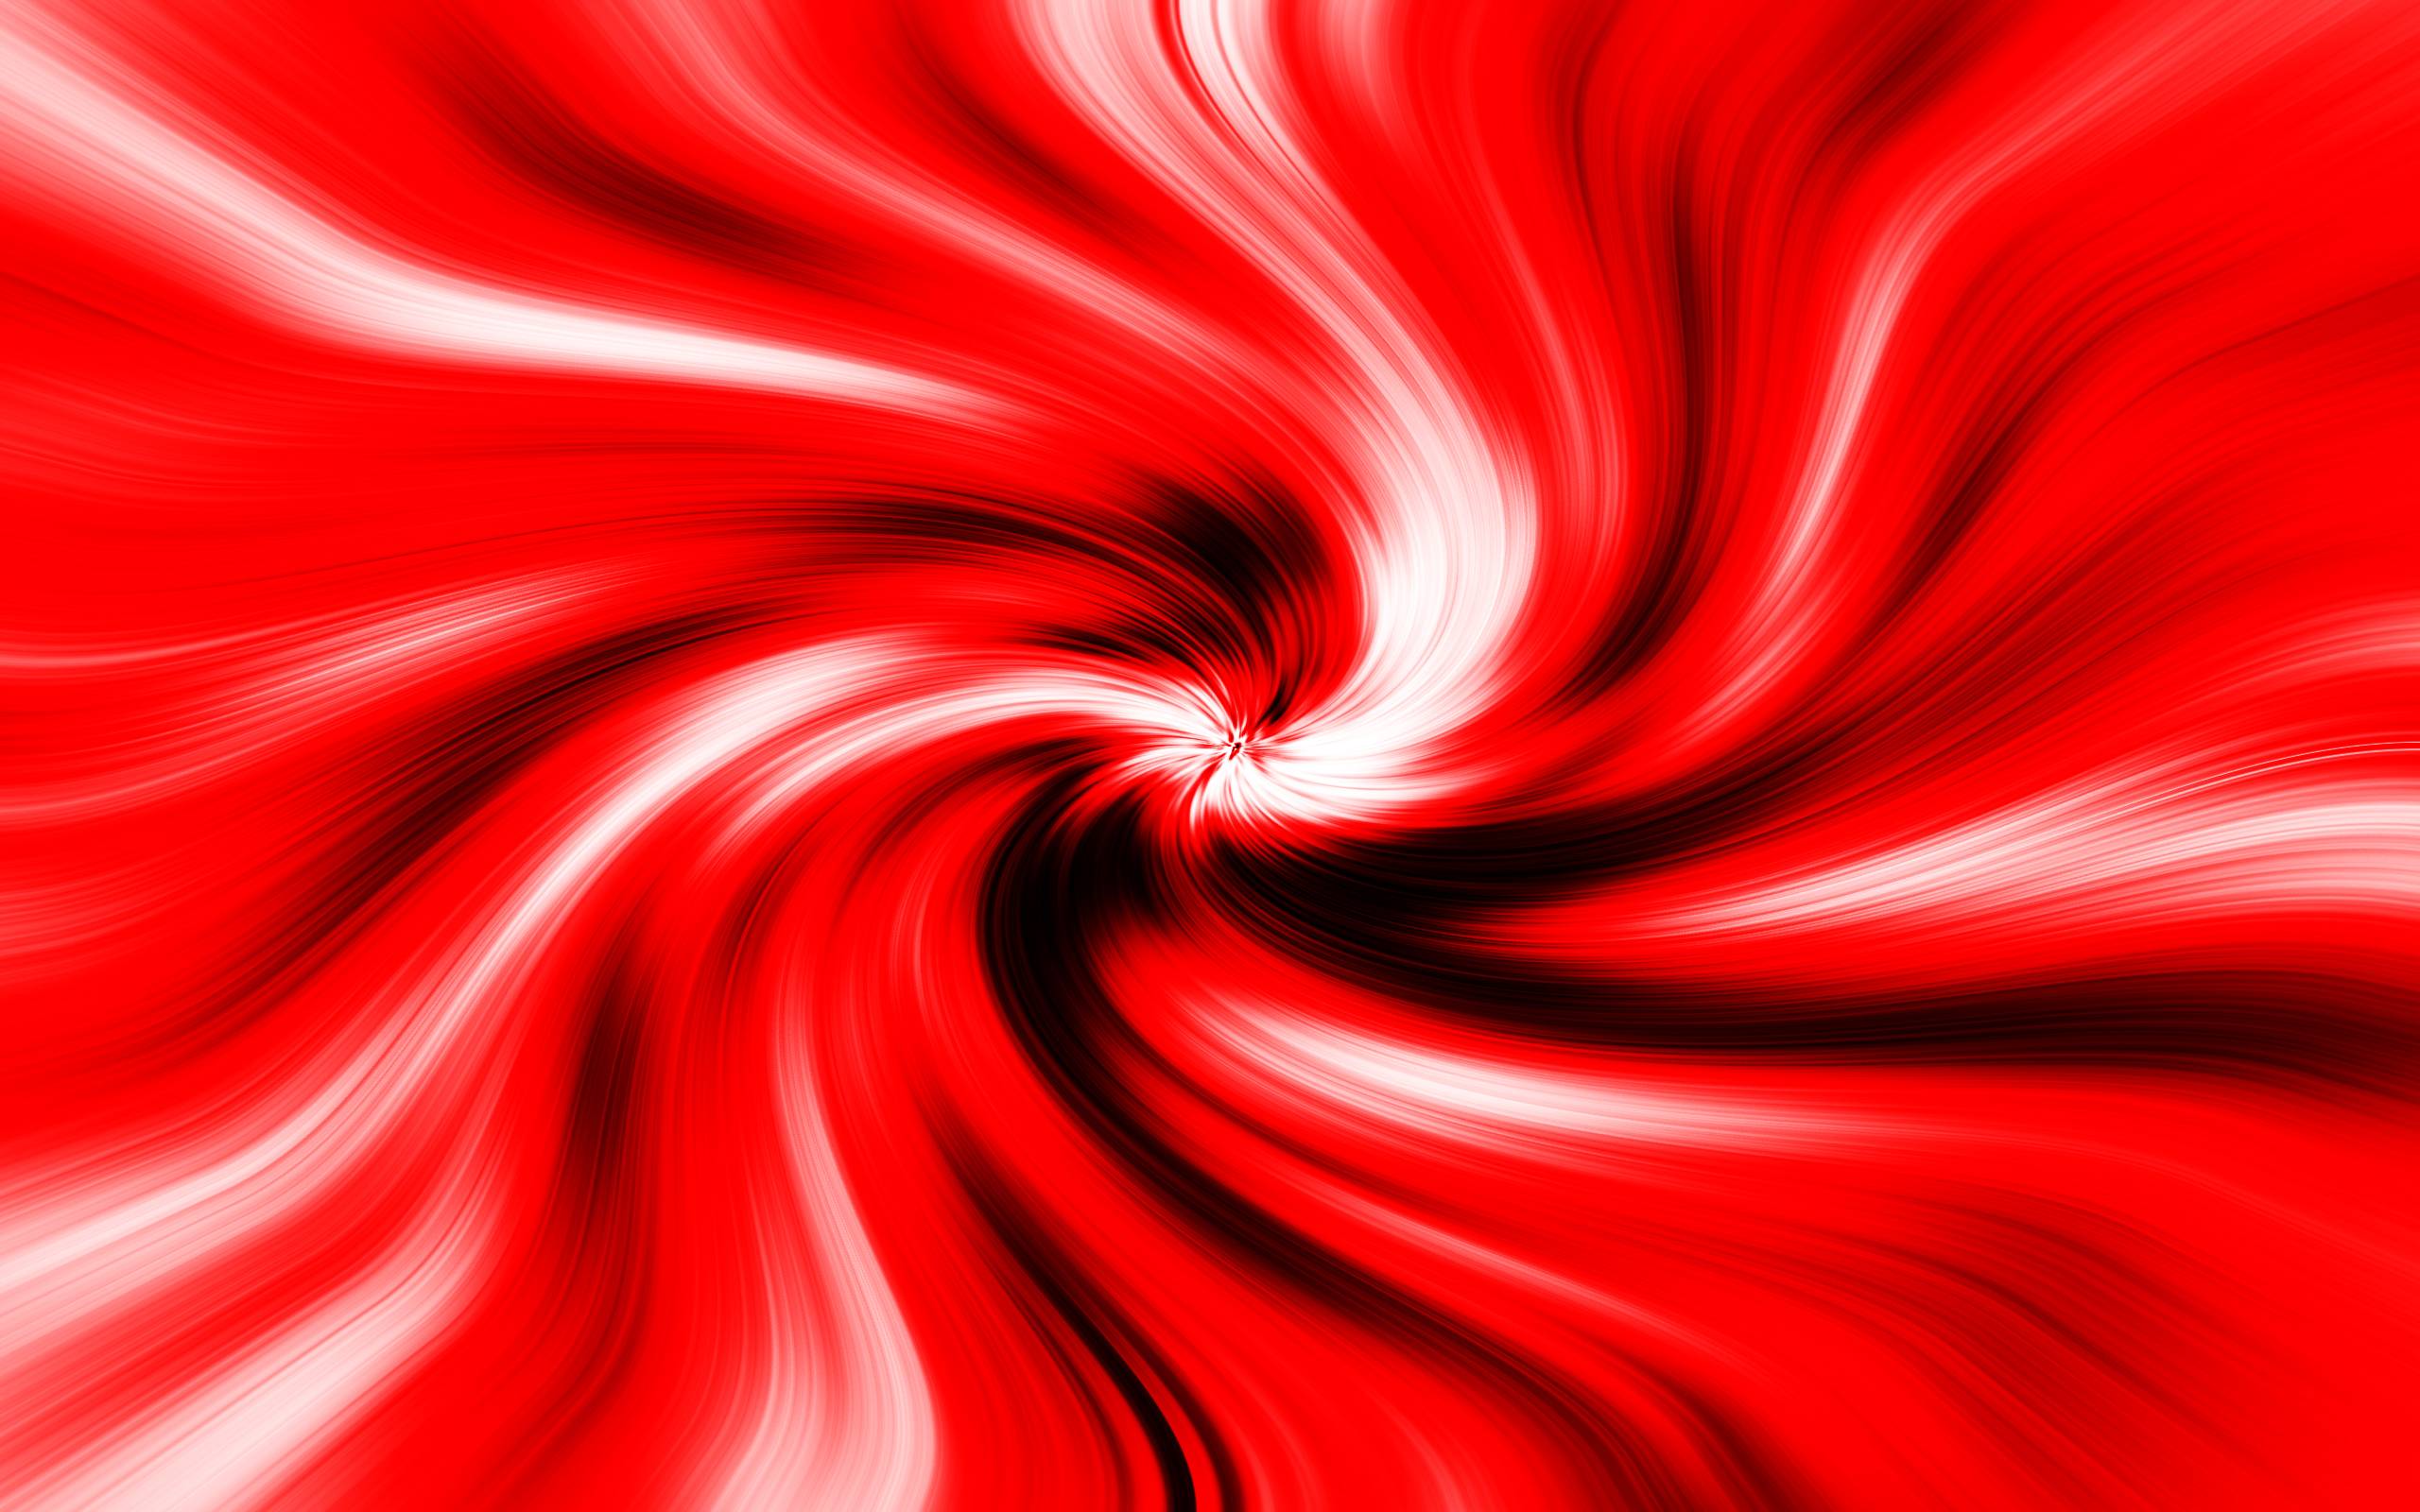 Artistic Swirl background red Images for your desktop and mobile